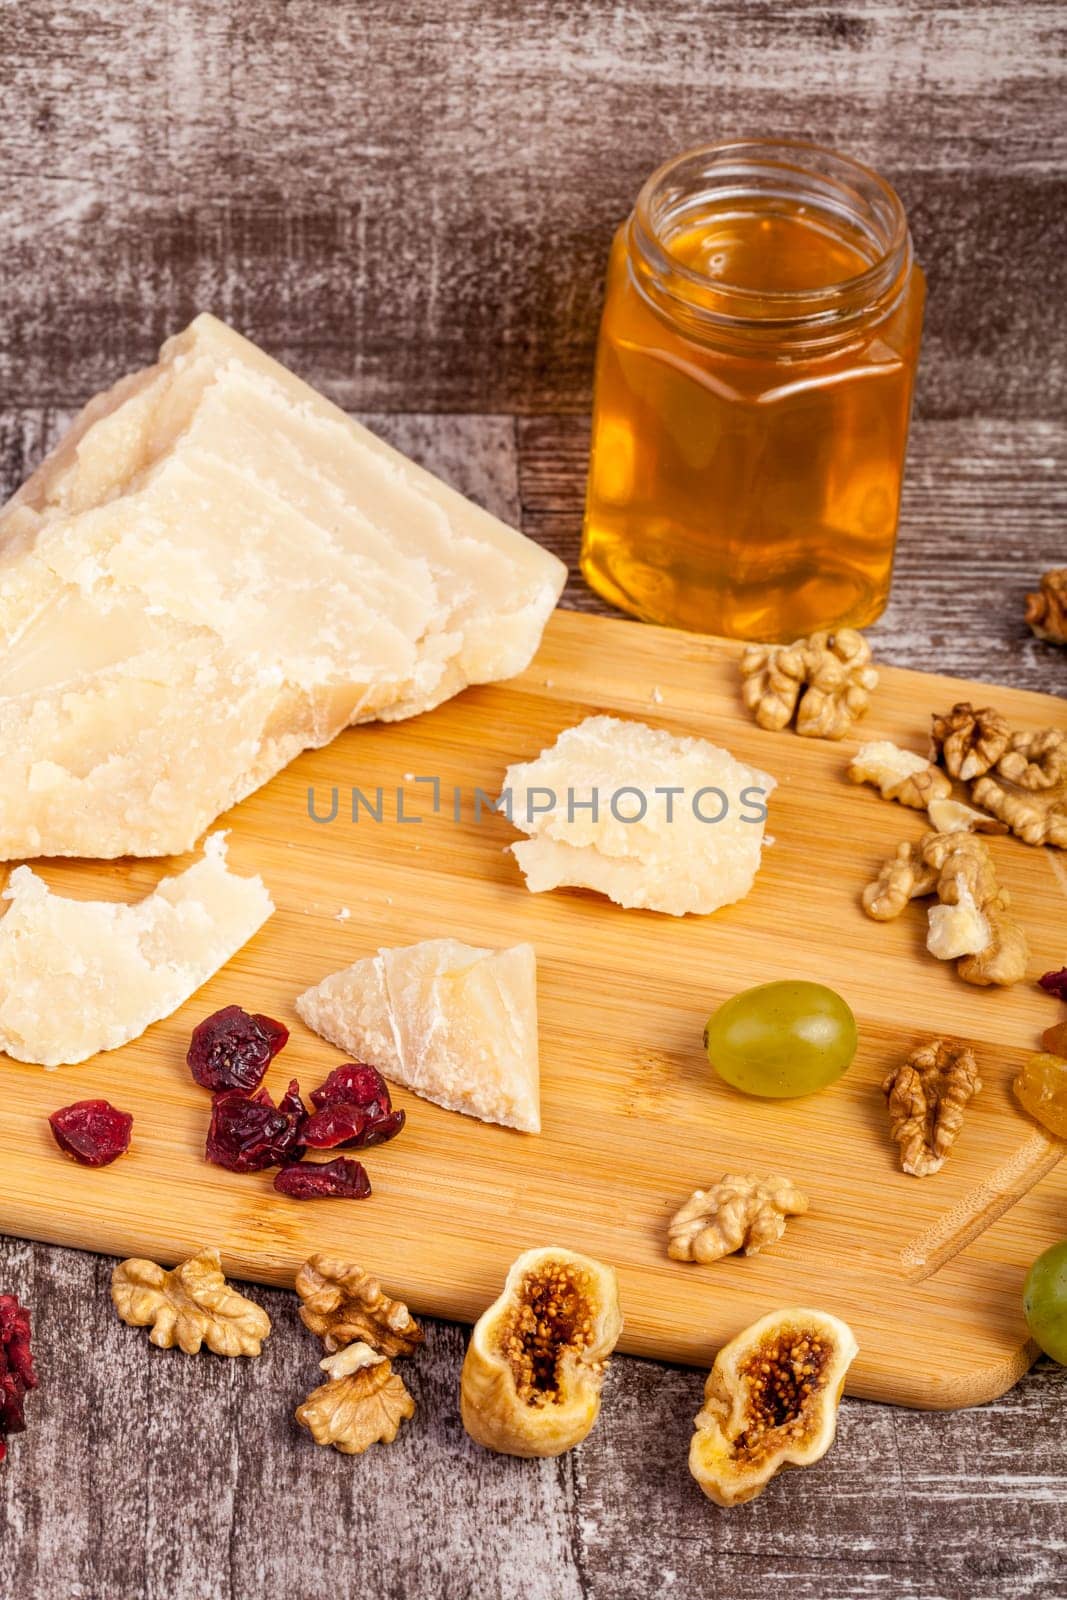 Healthy food. Honey, nuts and cheese on wooden background